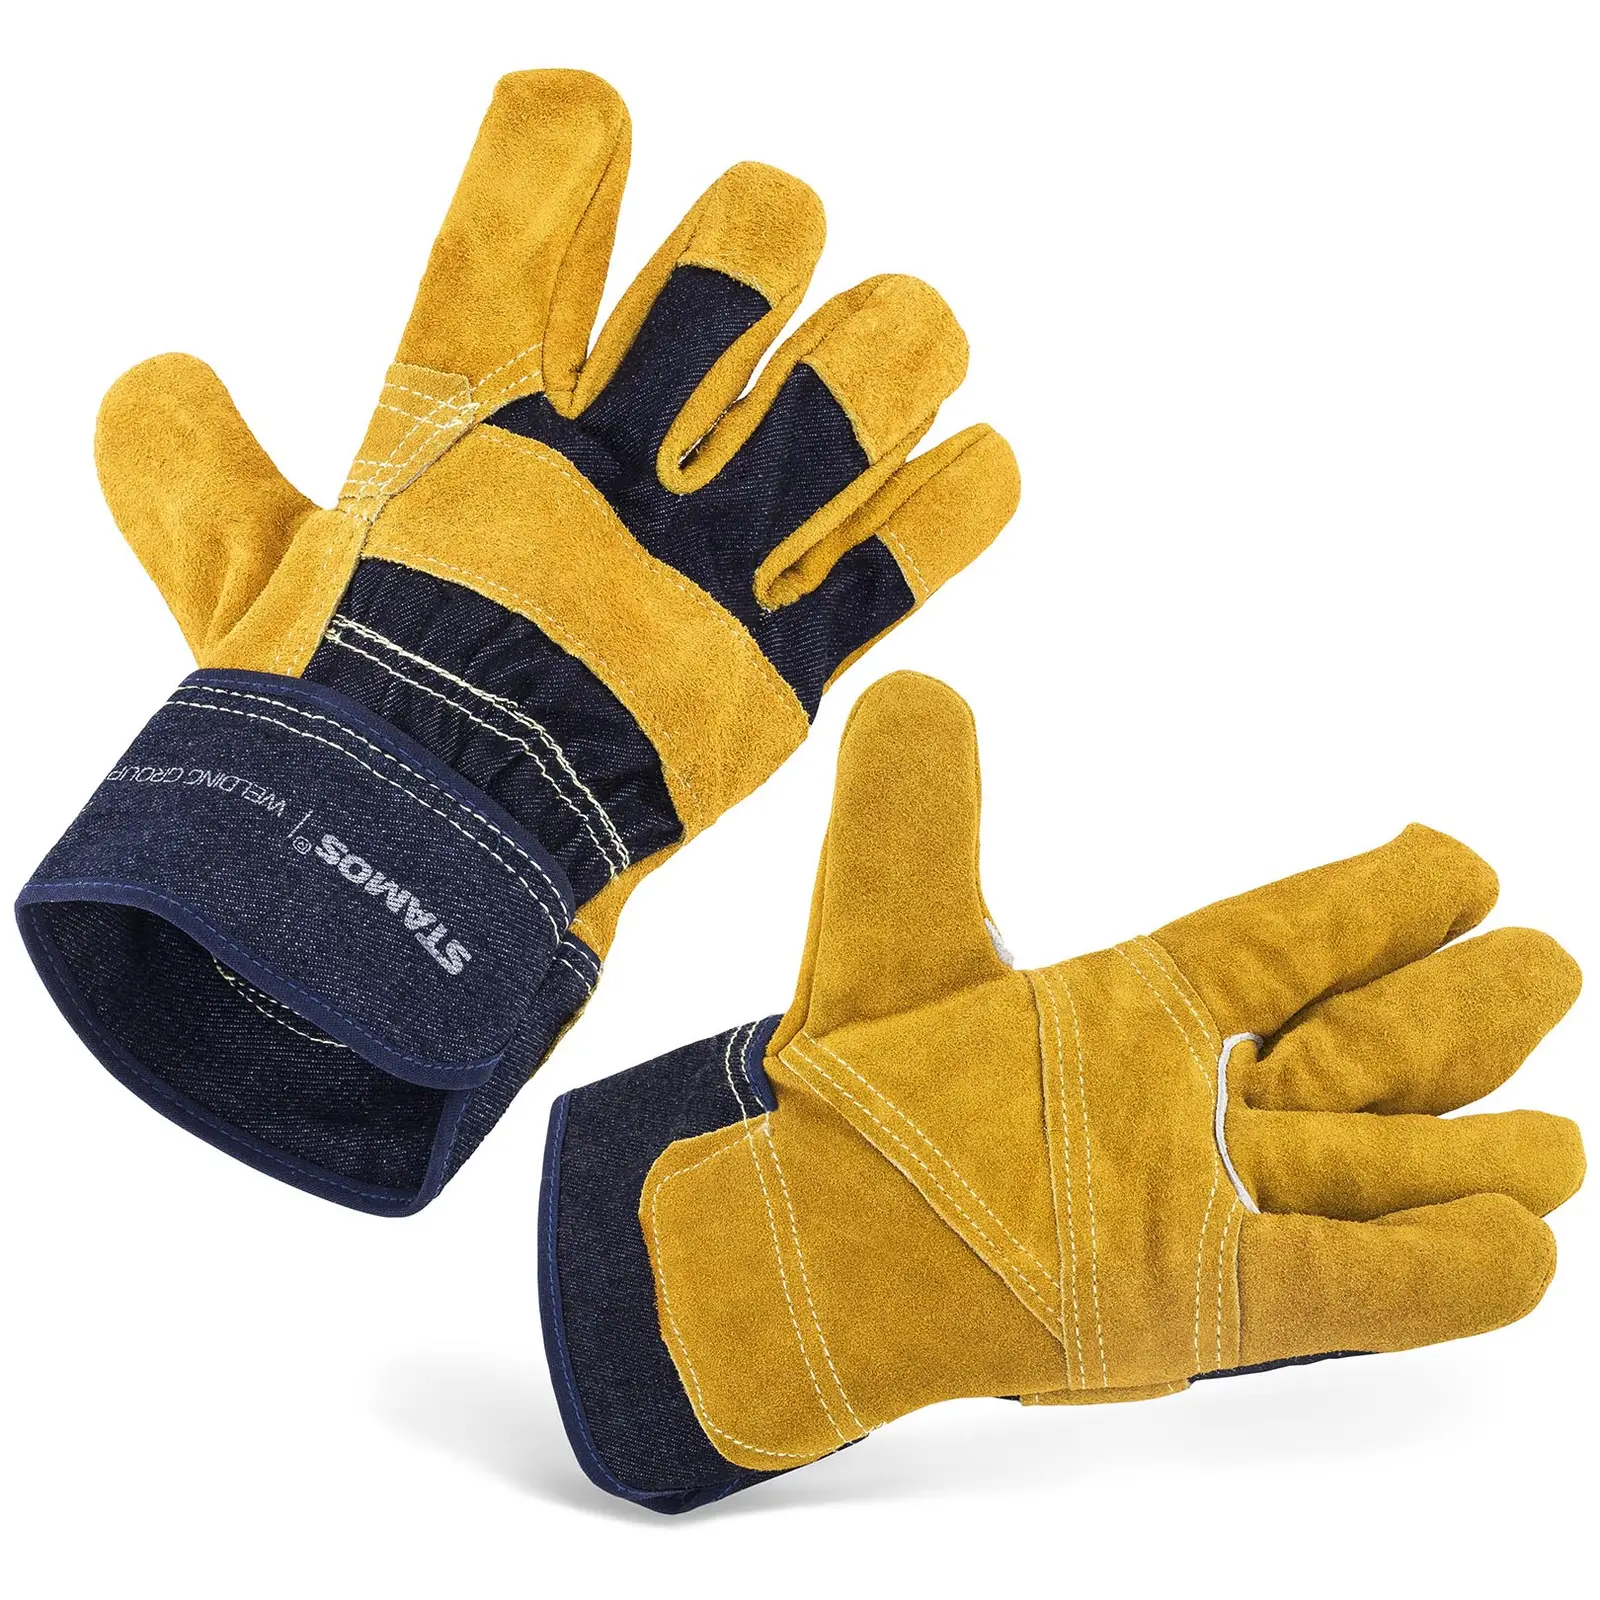 Welding gloves - size. L - lined